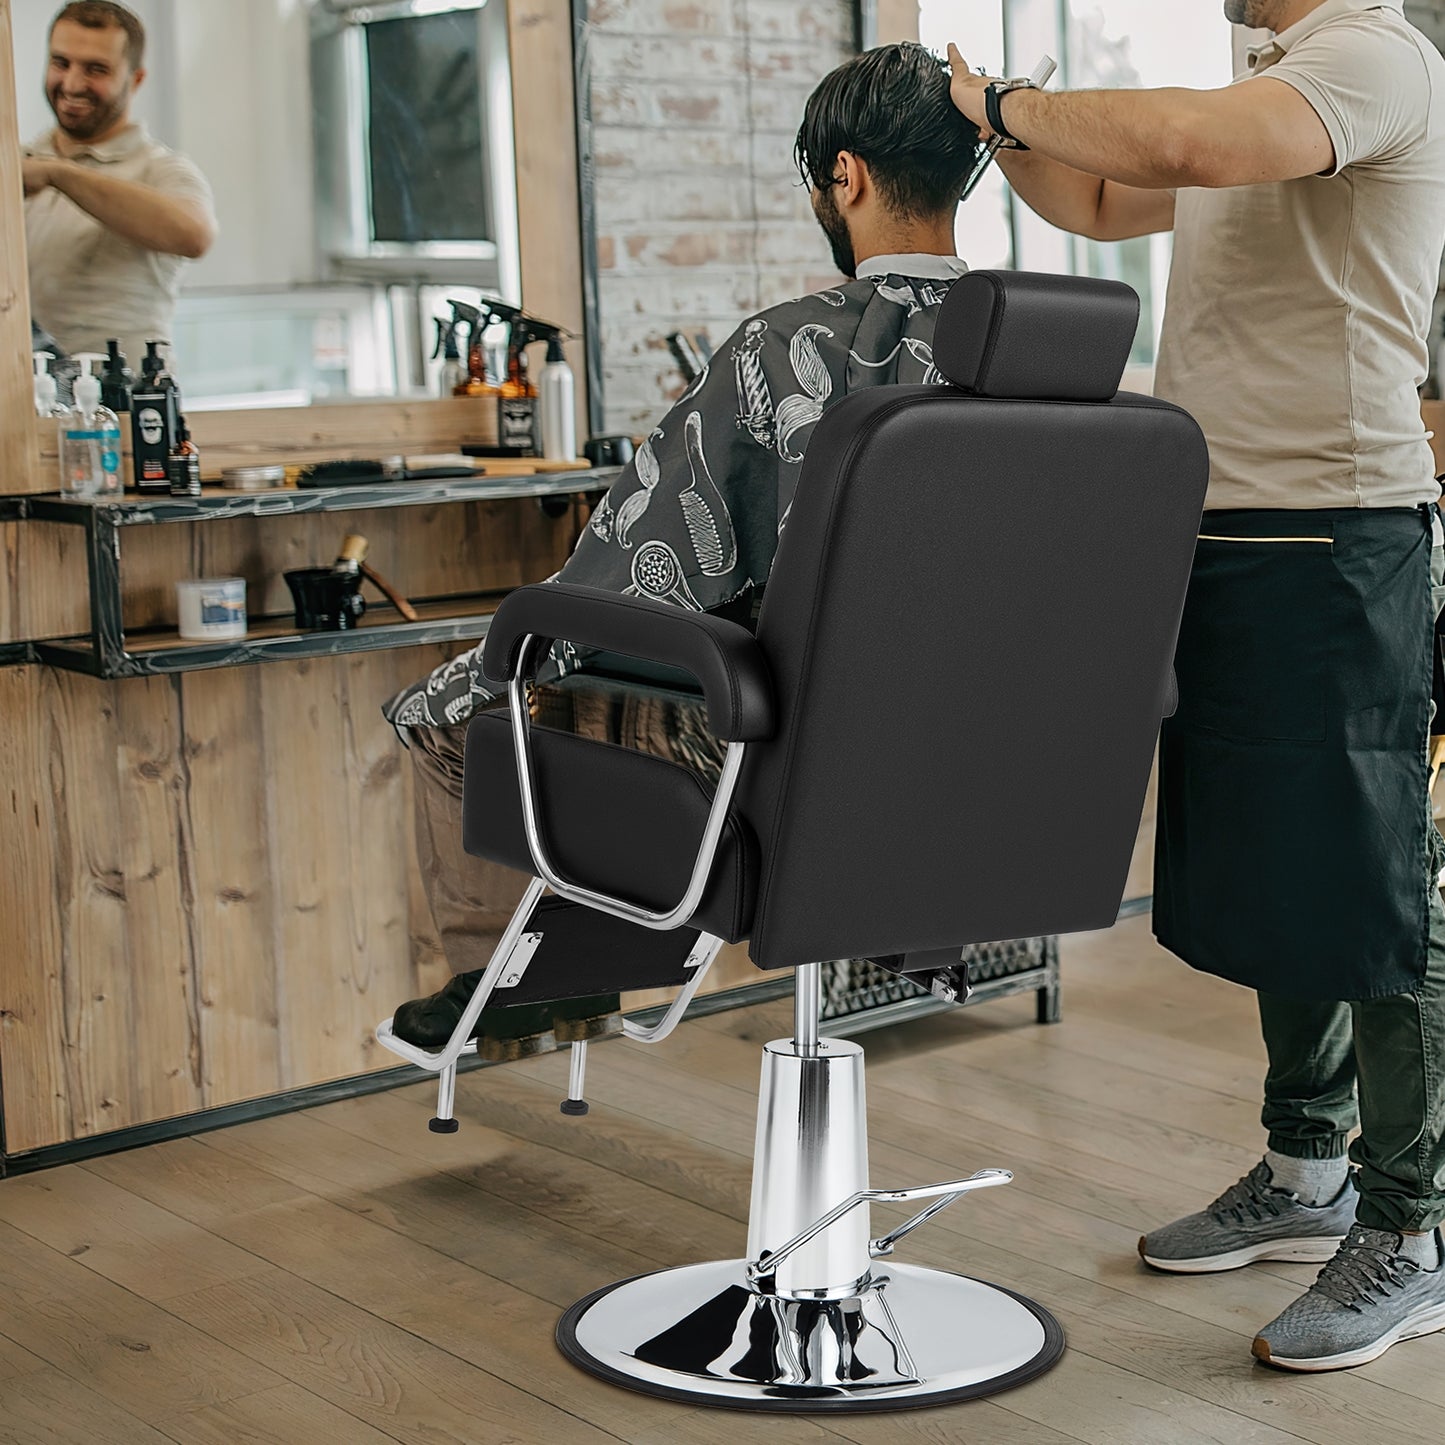 360 Degrees Swivel Salon Hydraulic Barber Chair with Adjustable Headrest and Reclining Backrest-Black